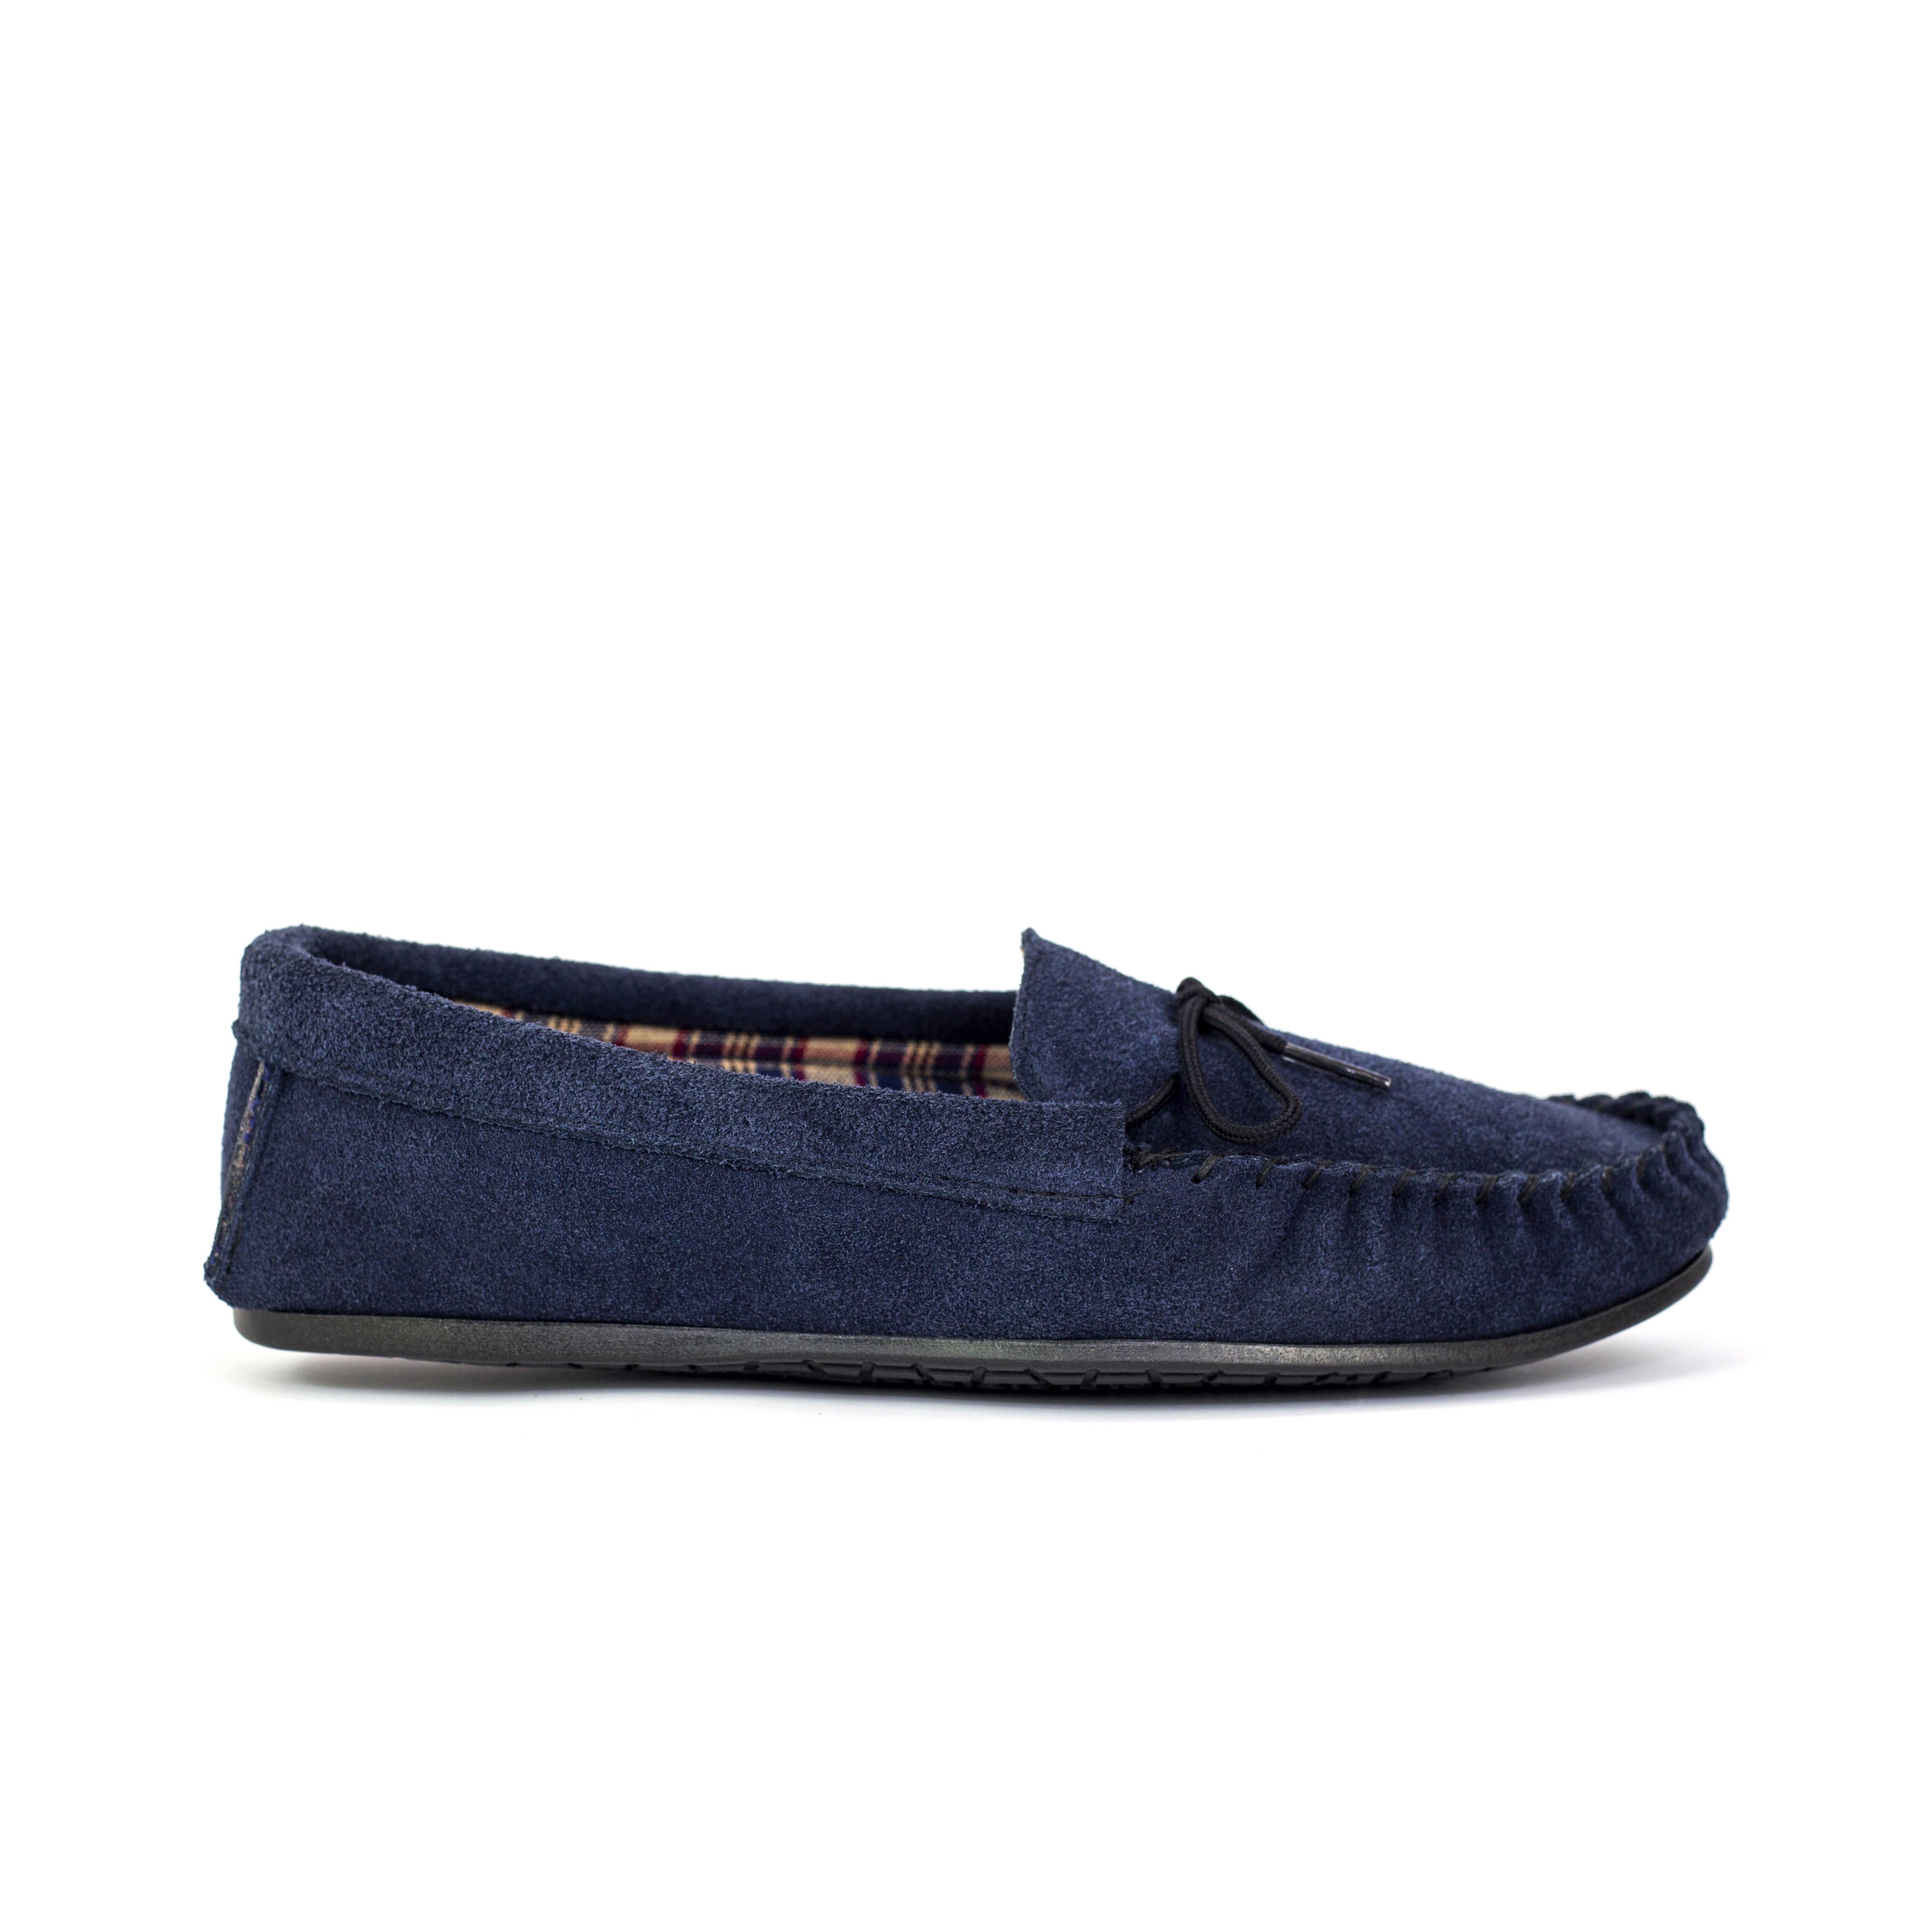 Ladies Leather Moccasin Slippers with Sheepskin Lining - Lambland